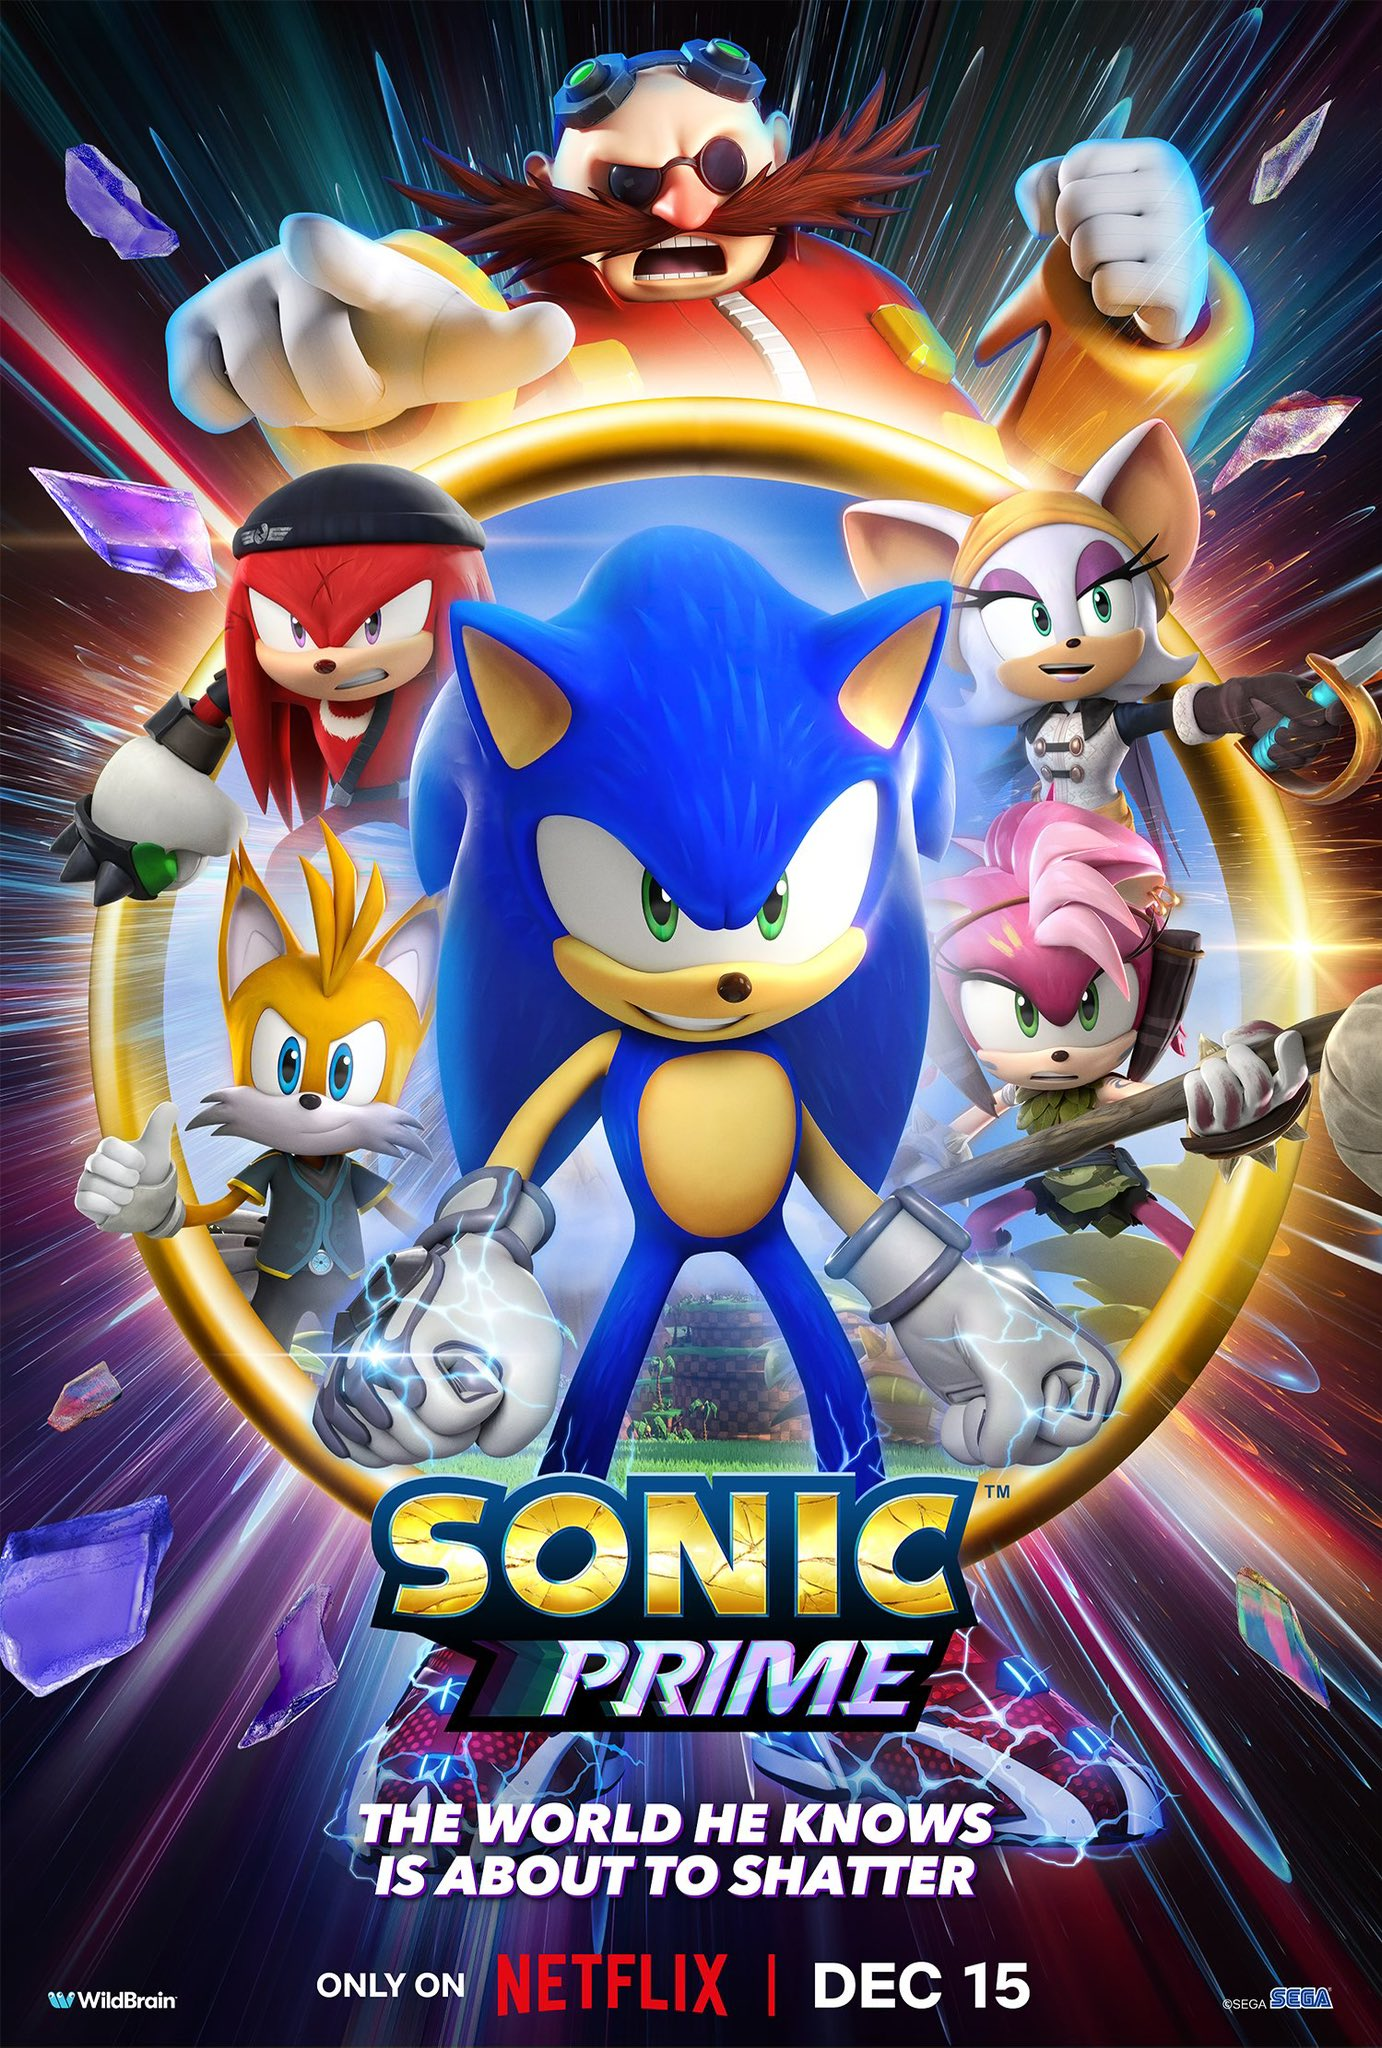 Sonic Prime Theme Song Fan Intro  Steffan Andrews & Mike Shields